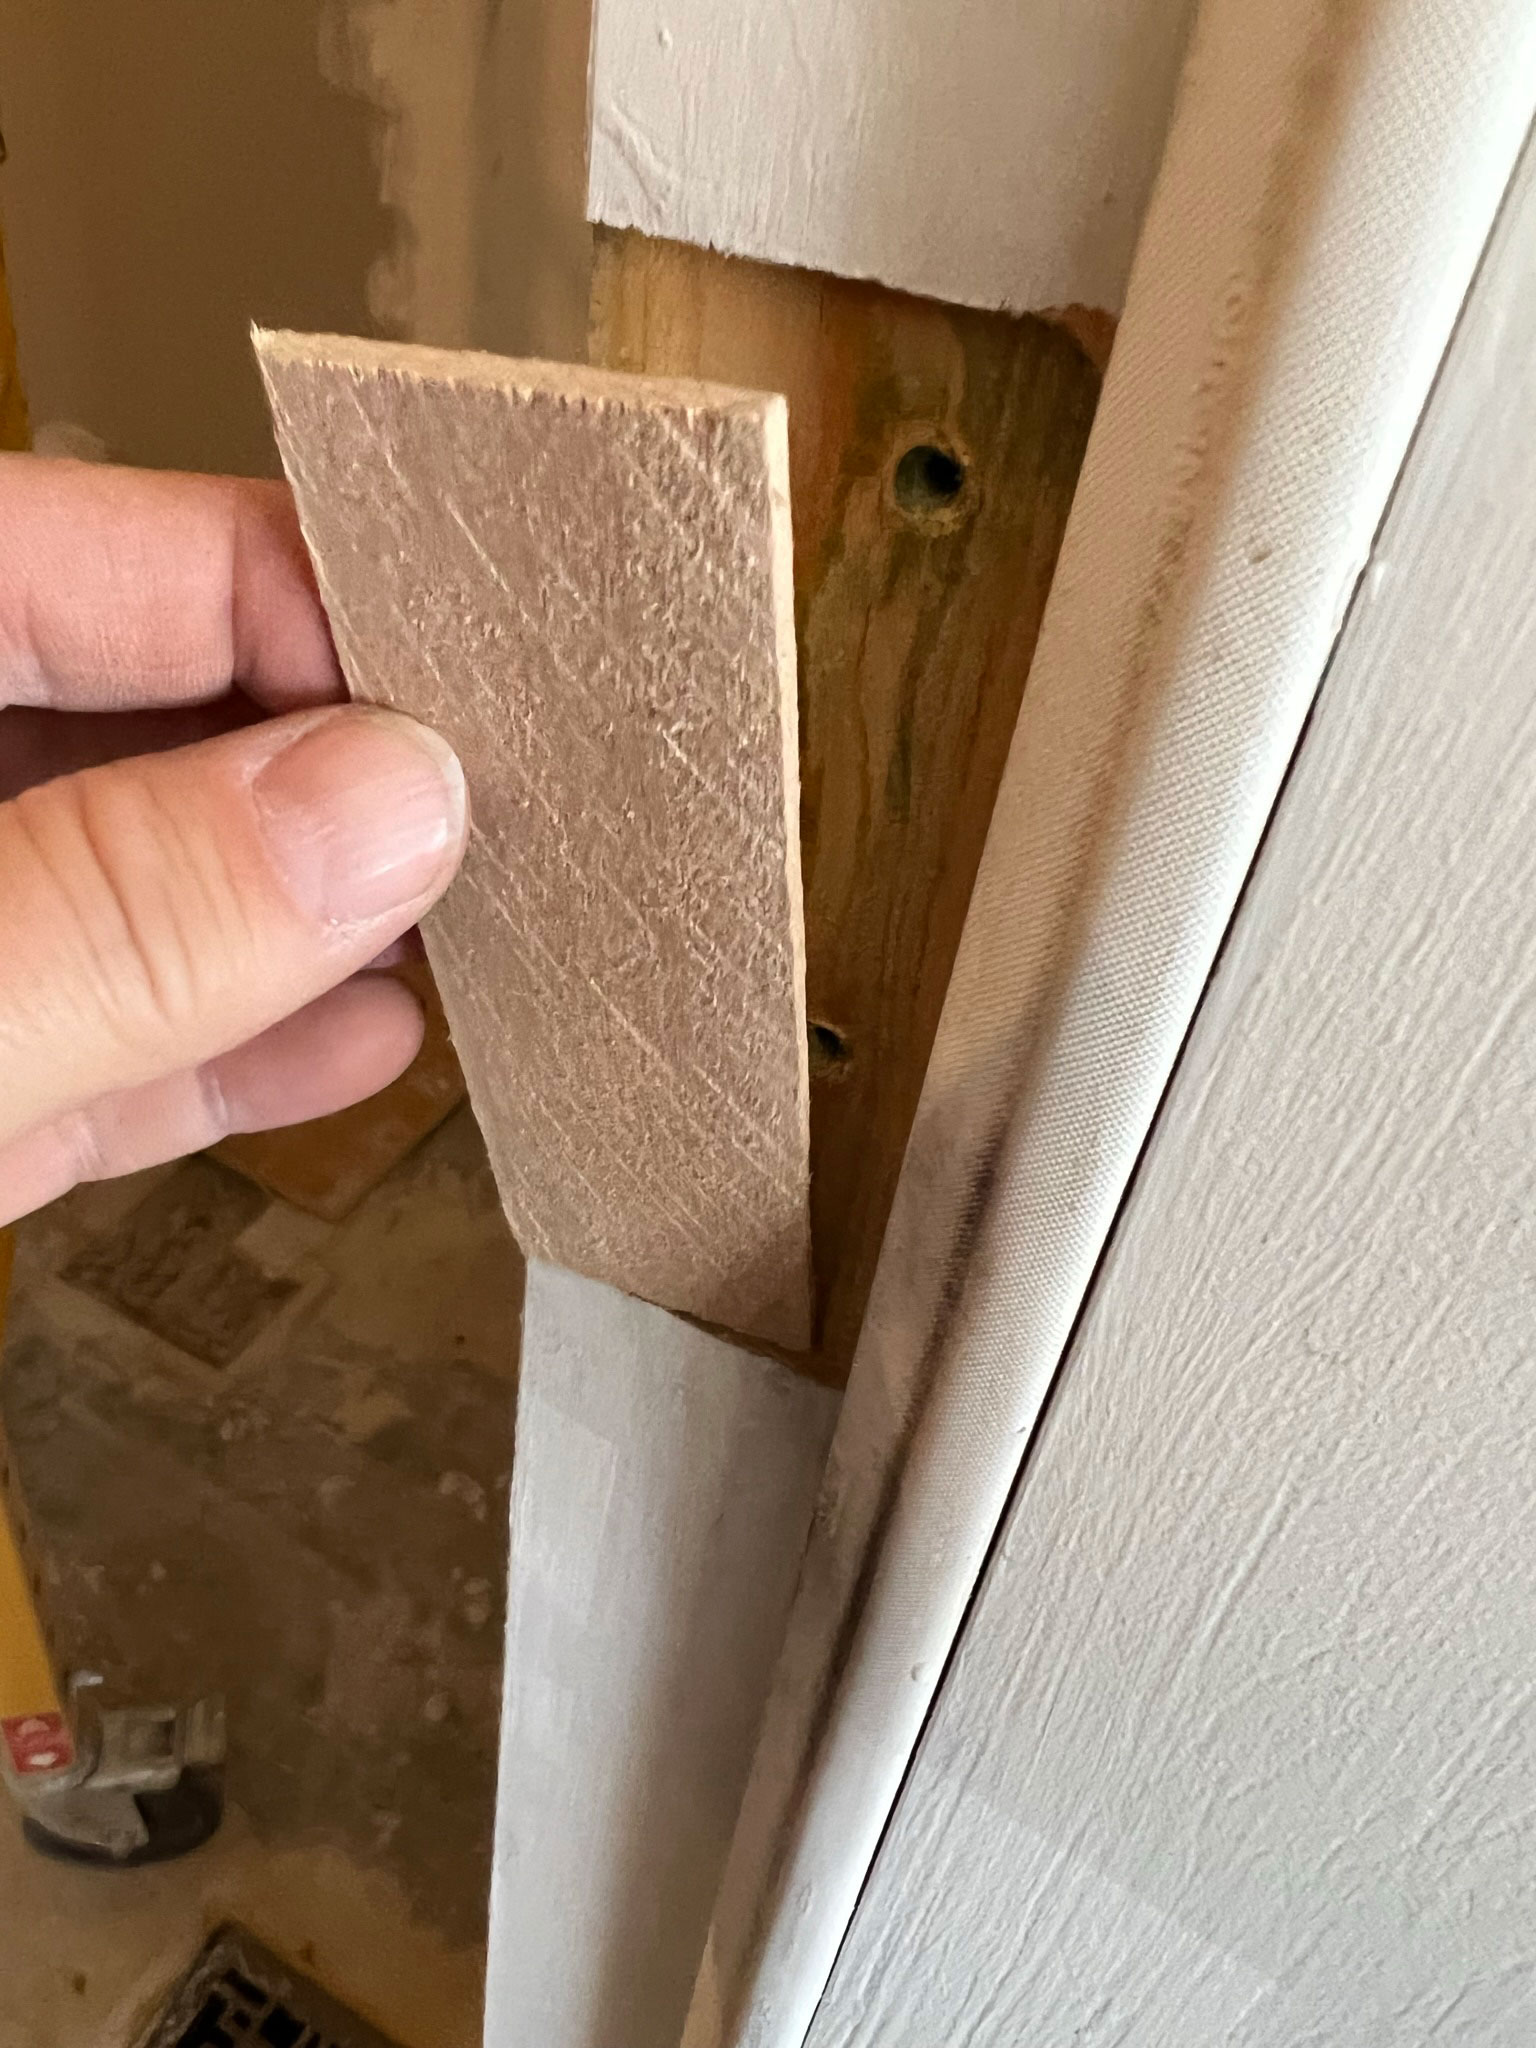 placing a thin piece of wood in the old hinge location